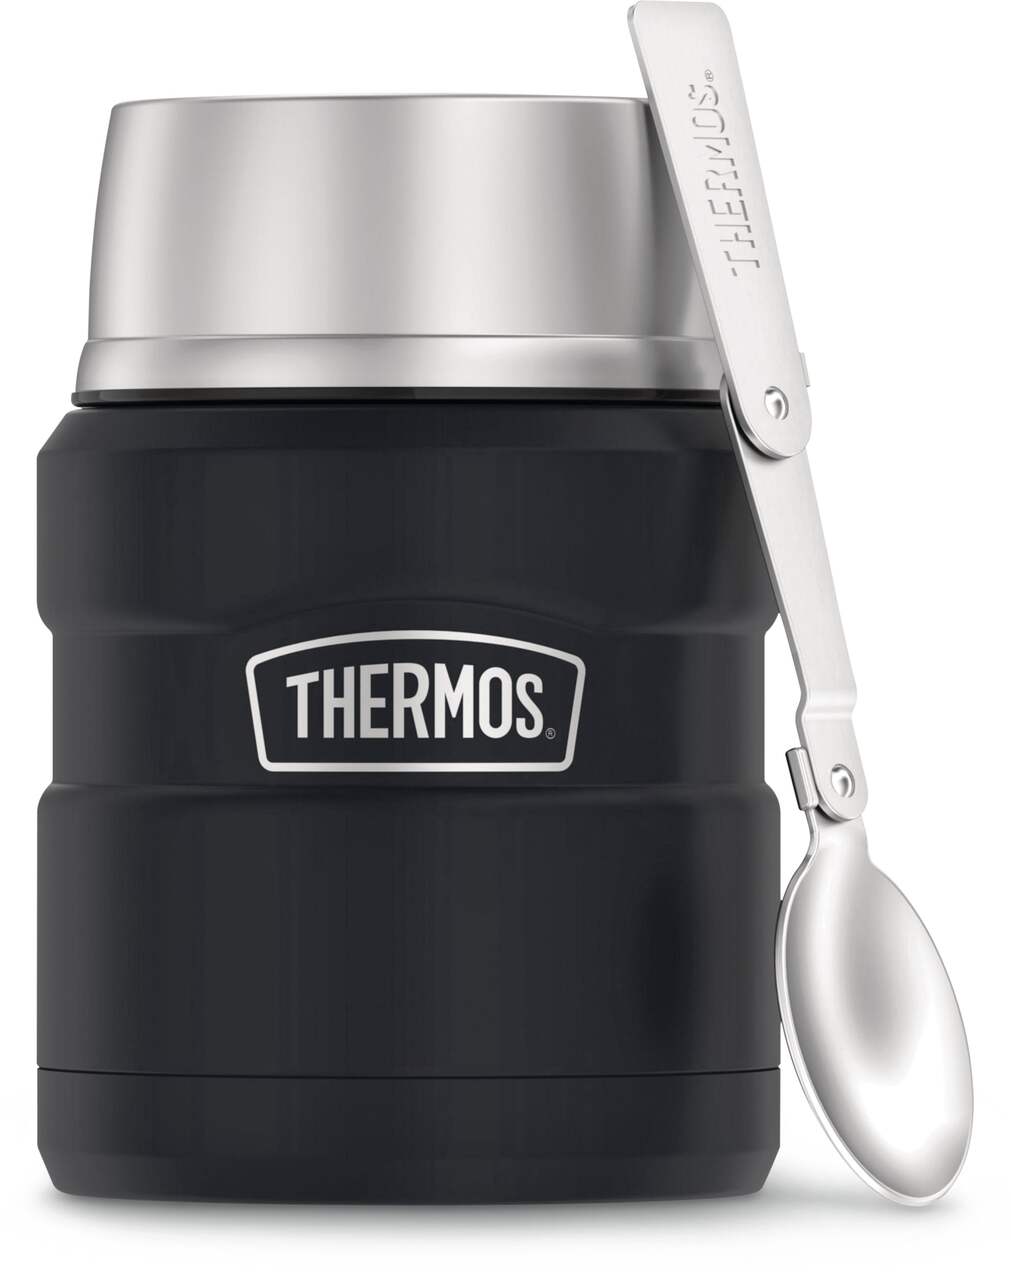 https://media-www.canadiantire.ca/product/living/kitchen/food-storage/1422106/thermos-stainless-steel-470-ml-king-food-jars-41ee5541-31ca-4d9c-bd6a-66ca554d83d8-jpgrendition.jpg?imdensity=1&imwidth=1244&impolicy=mZoom